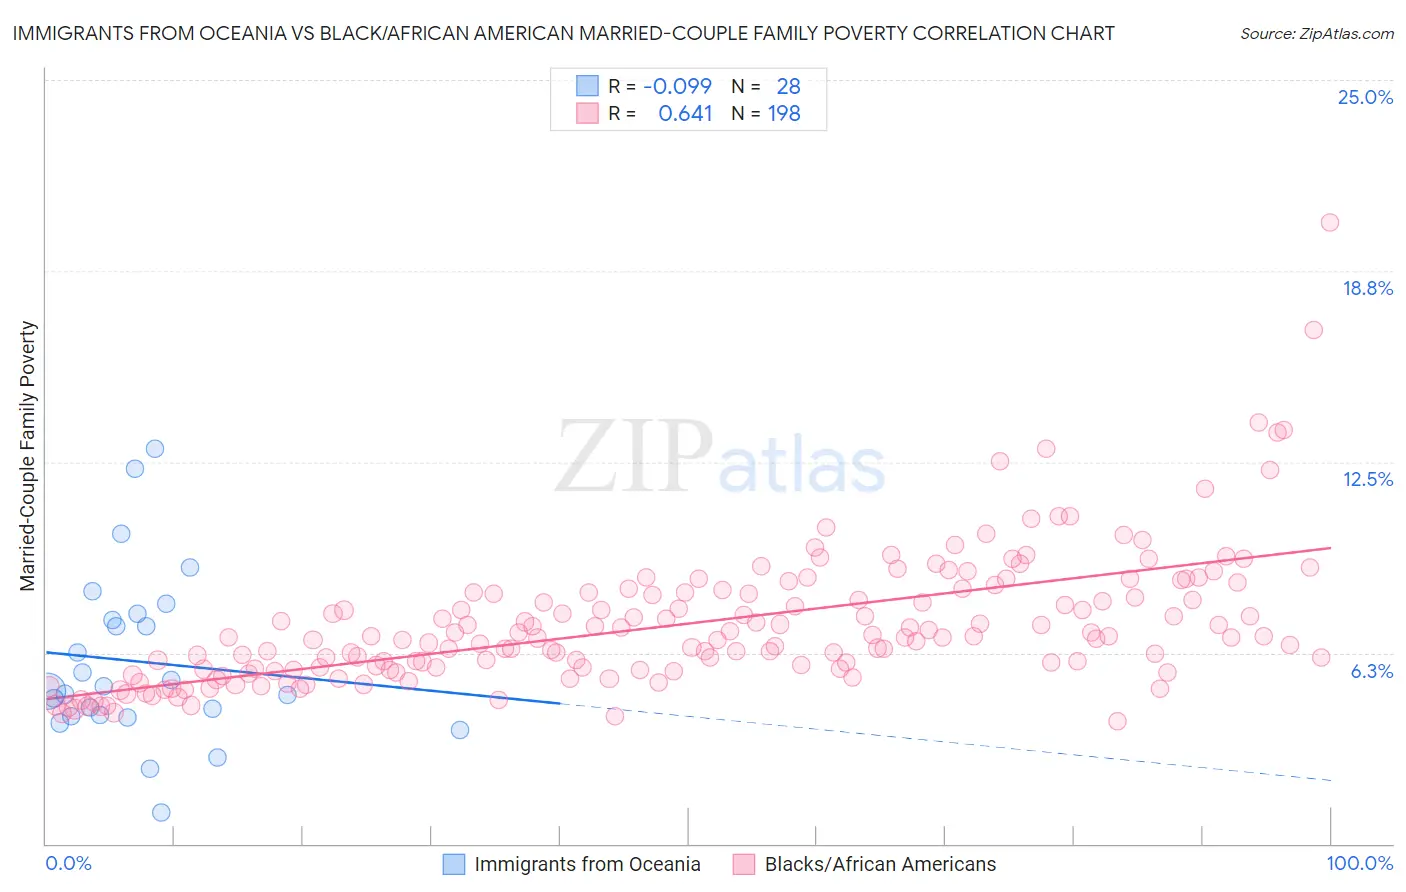 Immigrants from Oceania vs Black/African American Married-Couple Family Poverty